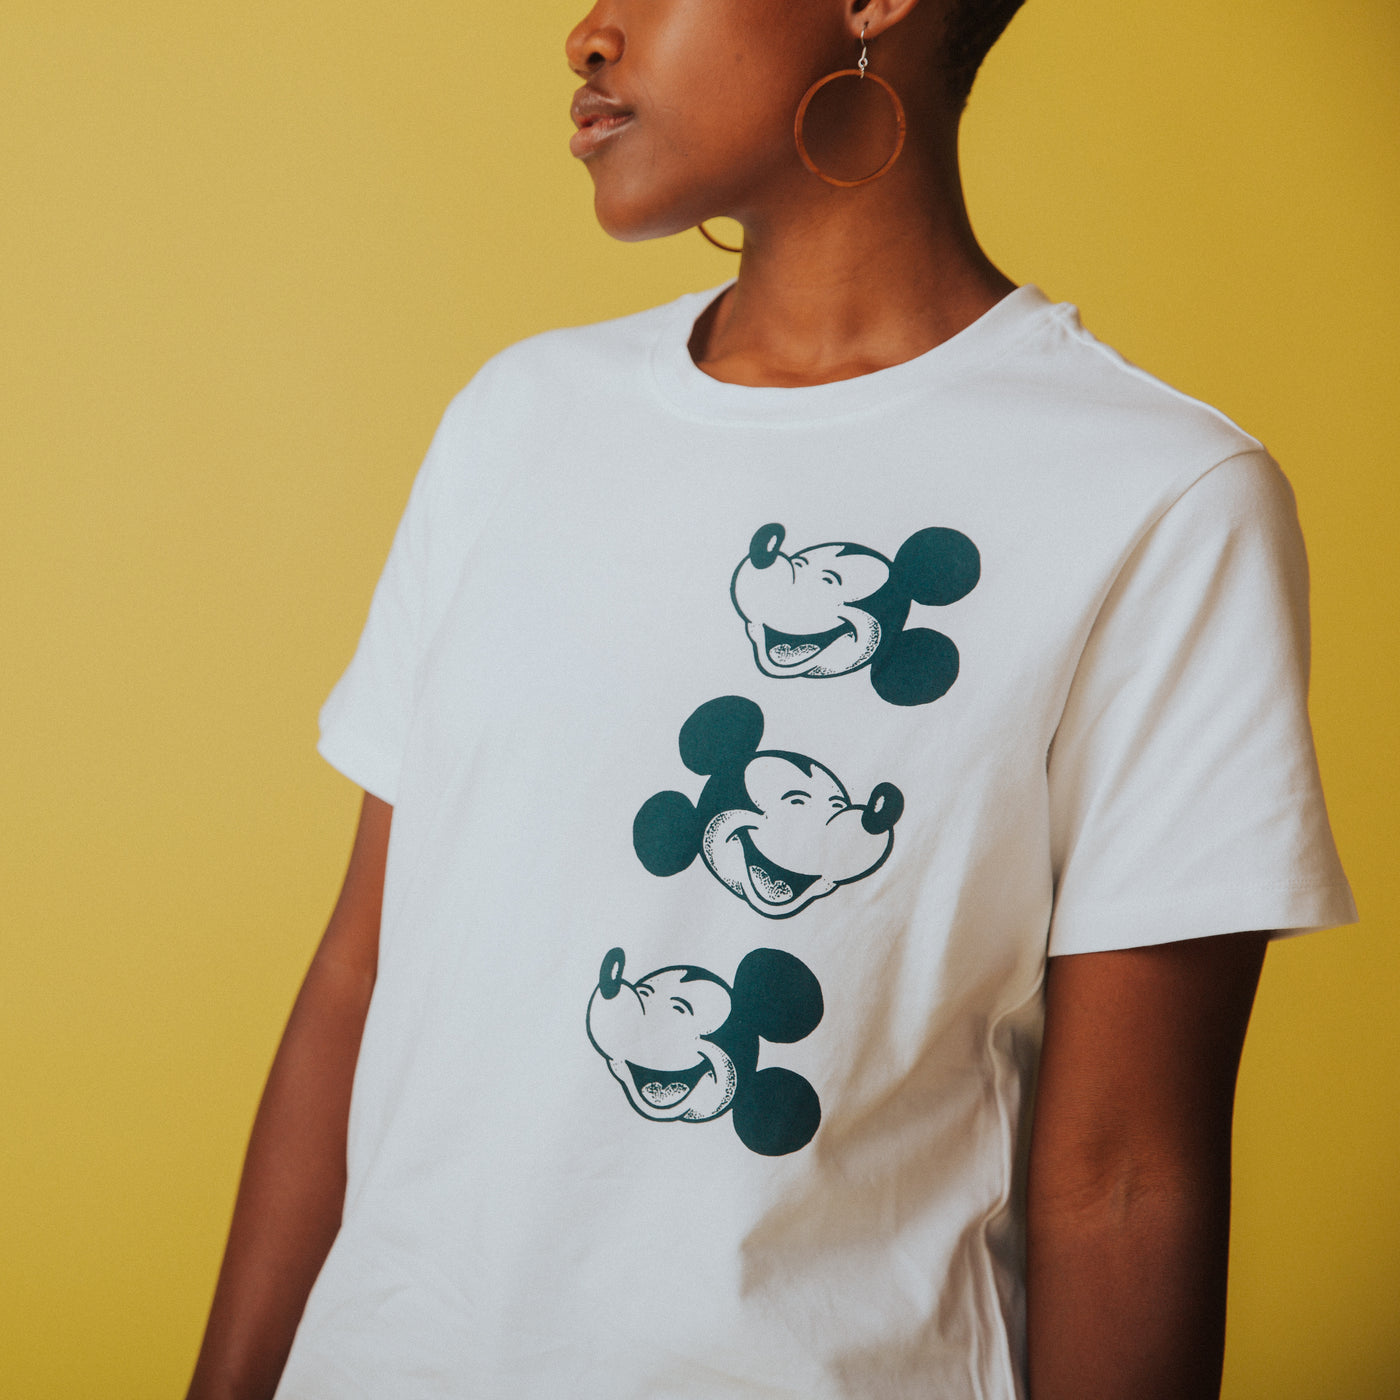 Adult Unisex Tee - 'Mickey Mouse' - Disney Collection from RAGS